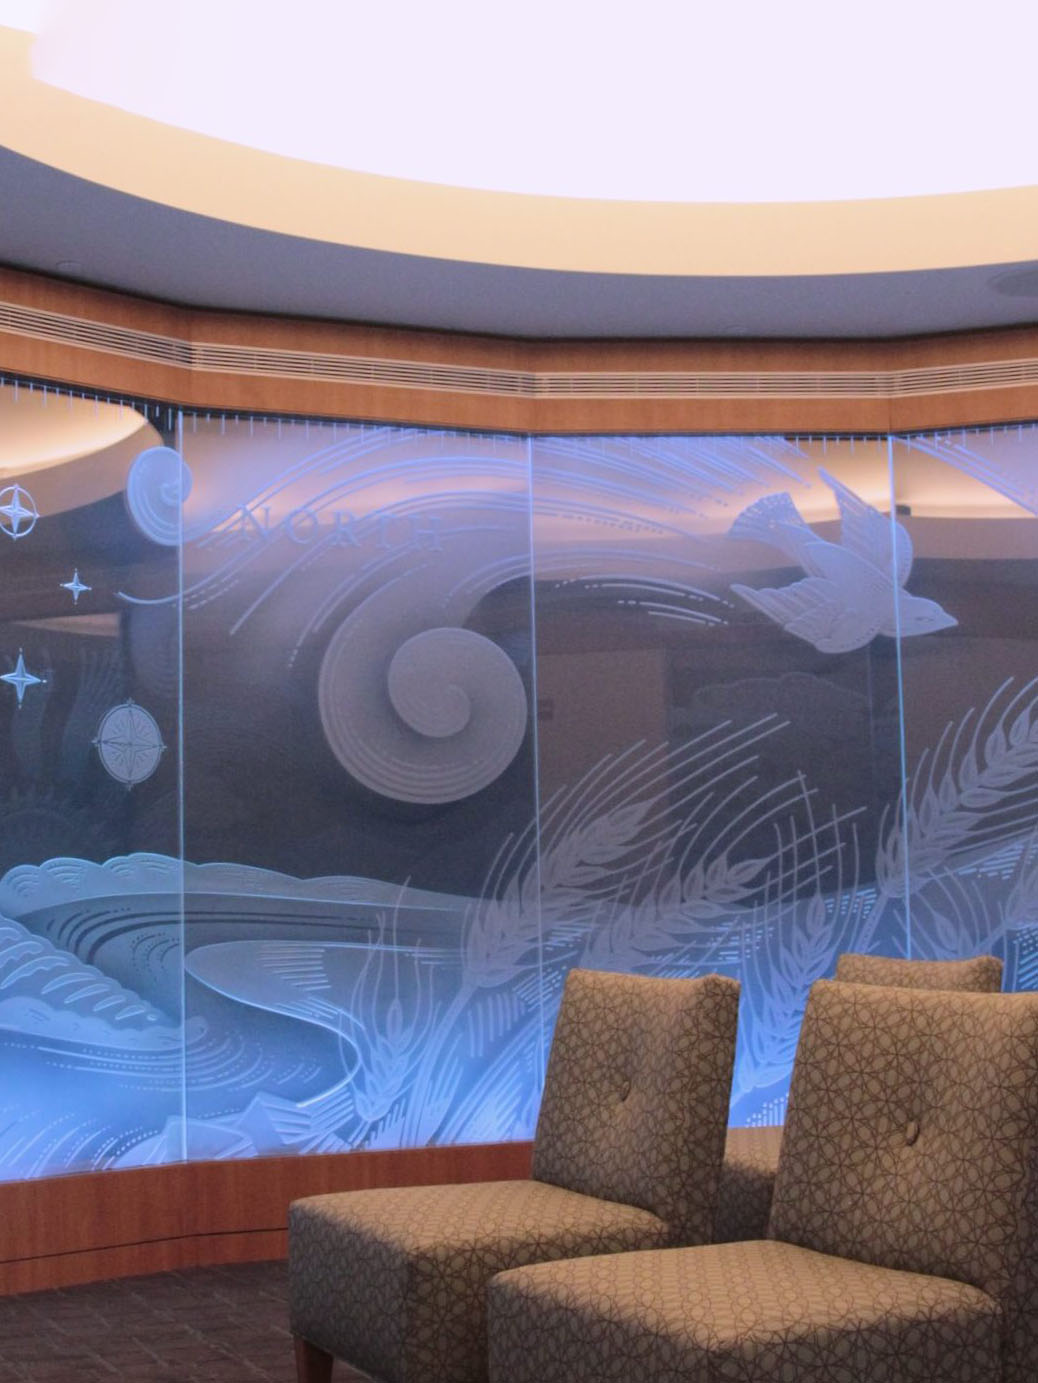 meditation room at CHOC children's hospital, used for spiritual healing and reflection